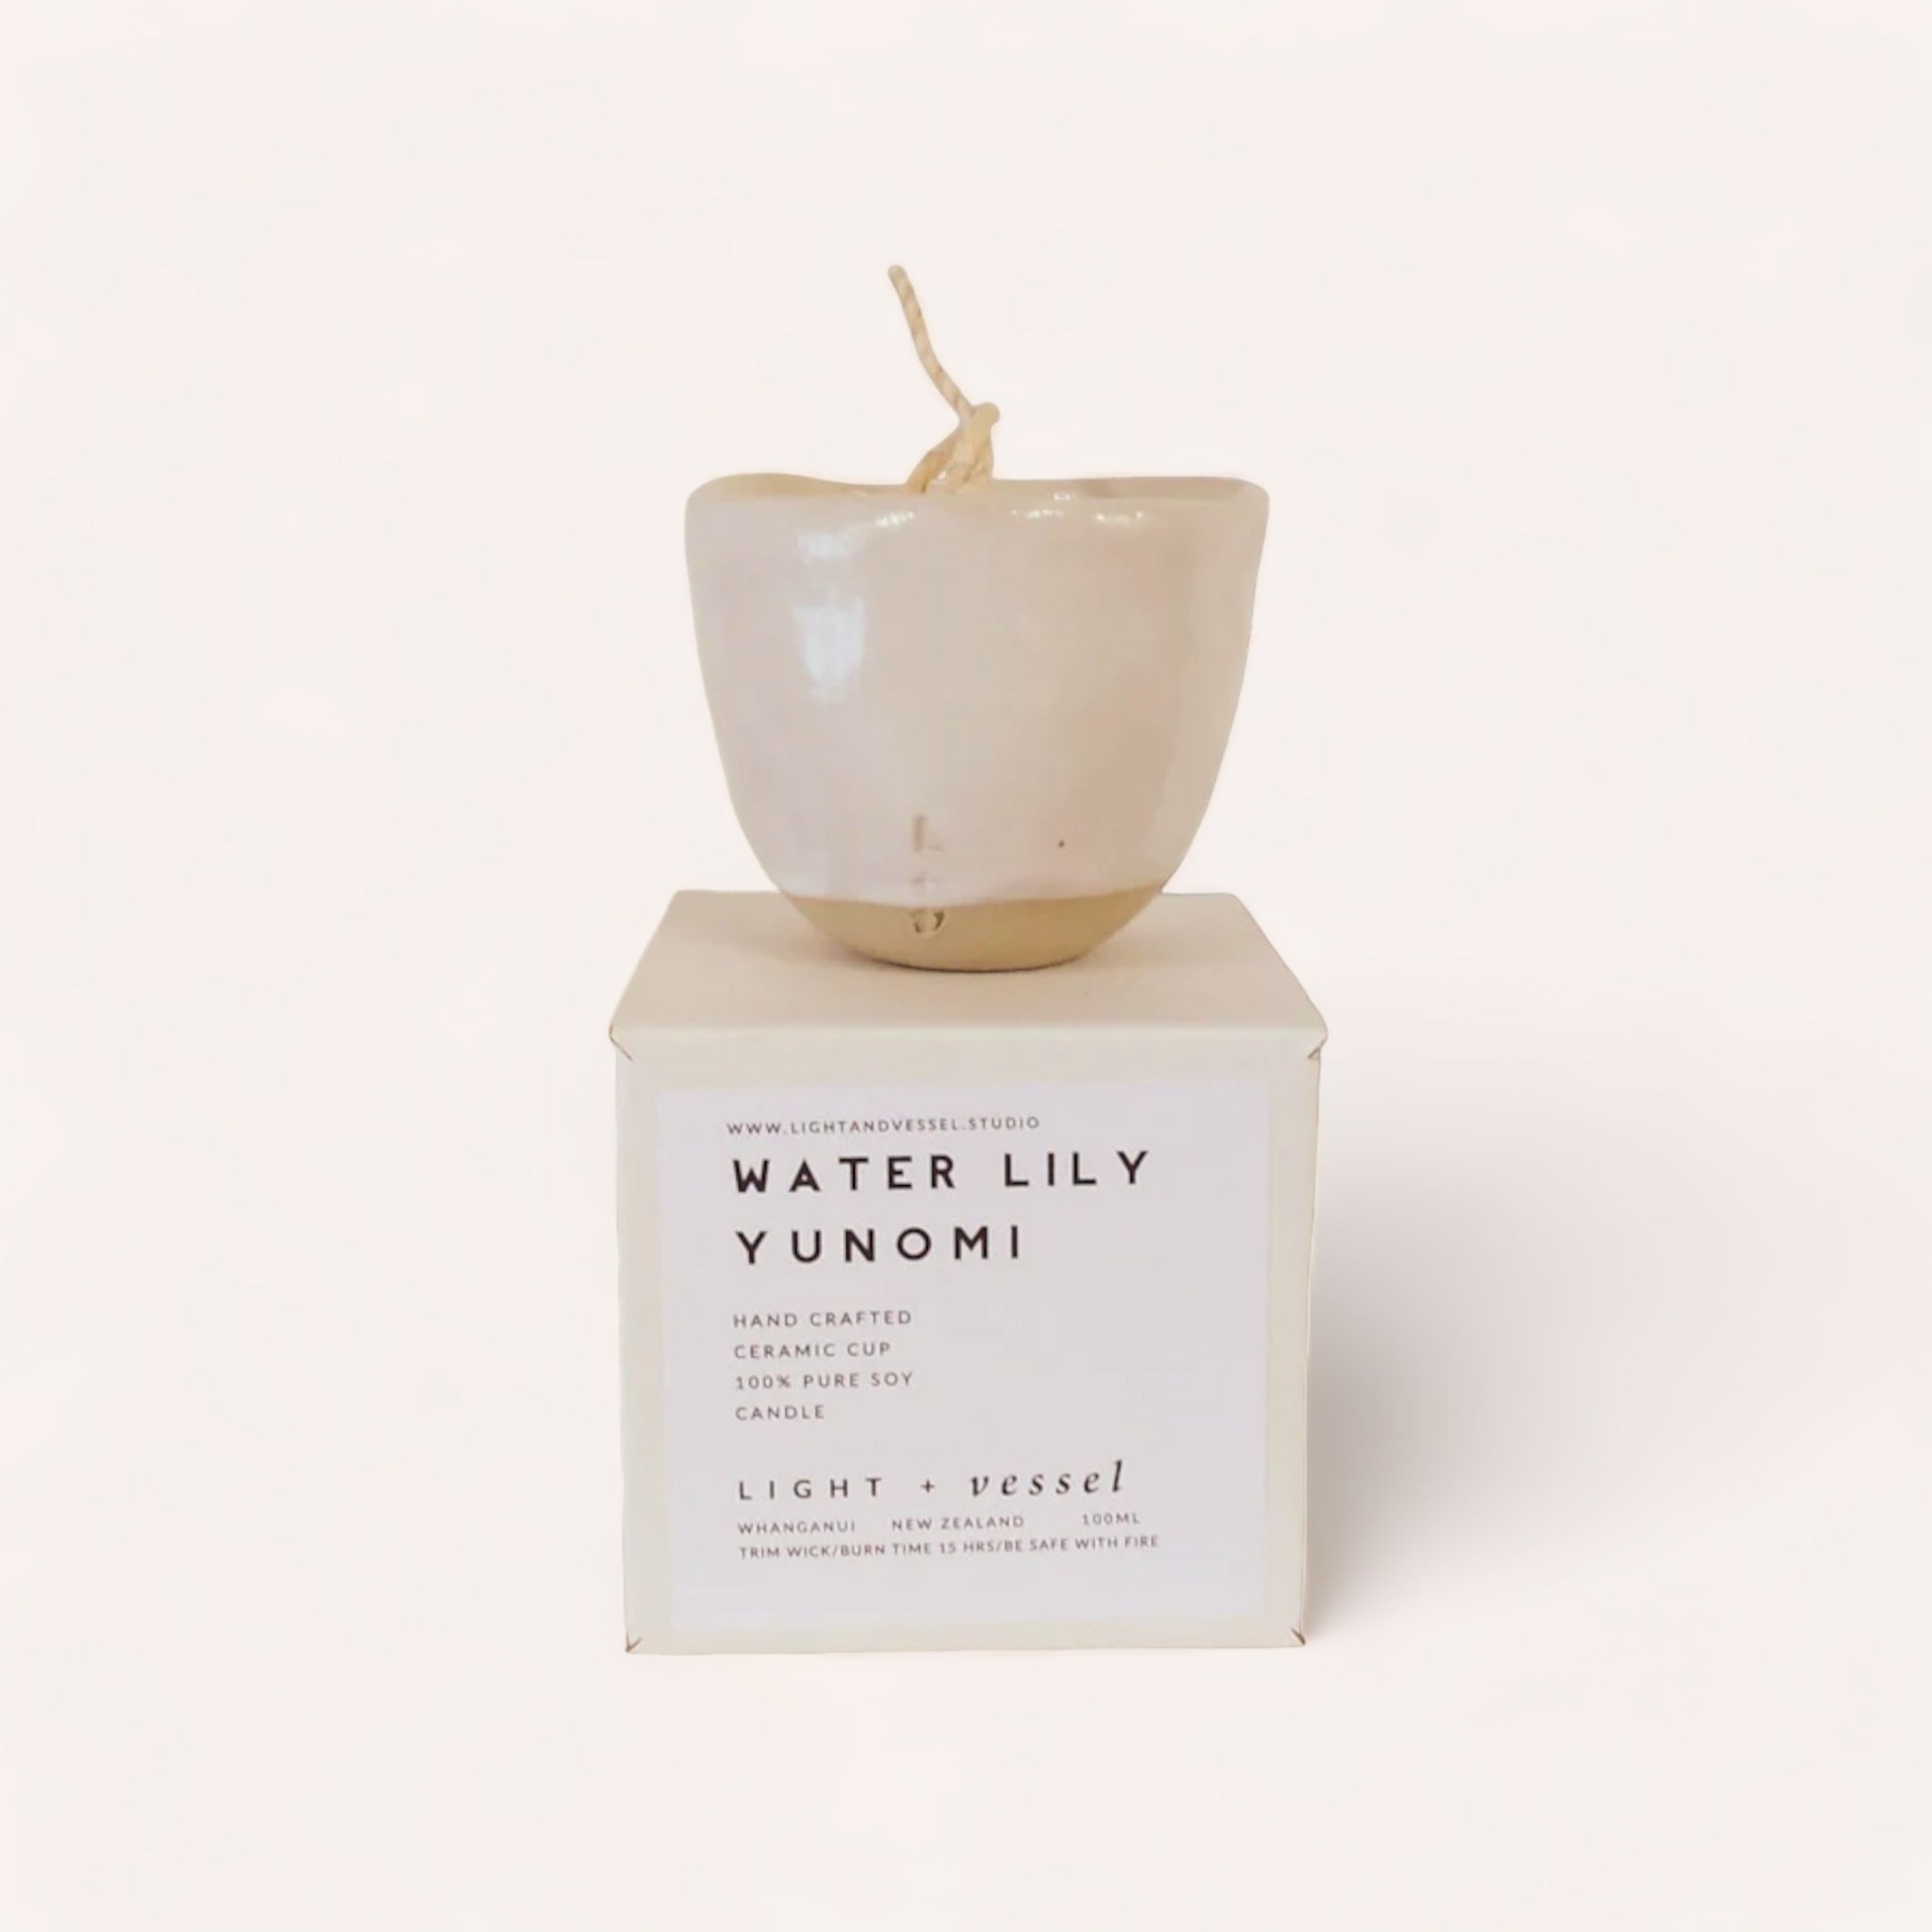 A serene, handcrafted Water Lily Candle by Light + Vessel styled as a Japanese tea cup, with the delicate fragrance of water lily, presented on a minimalist white background.